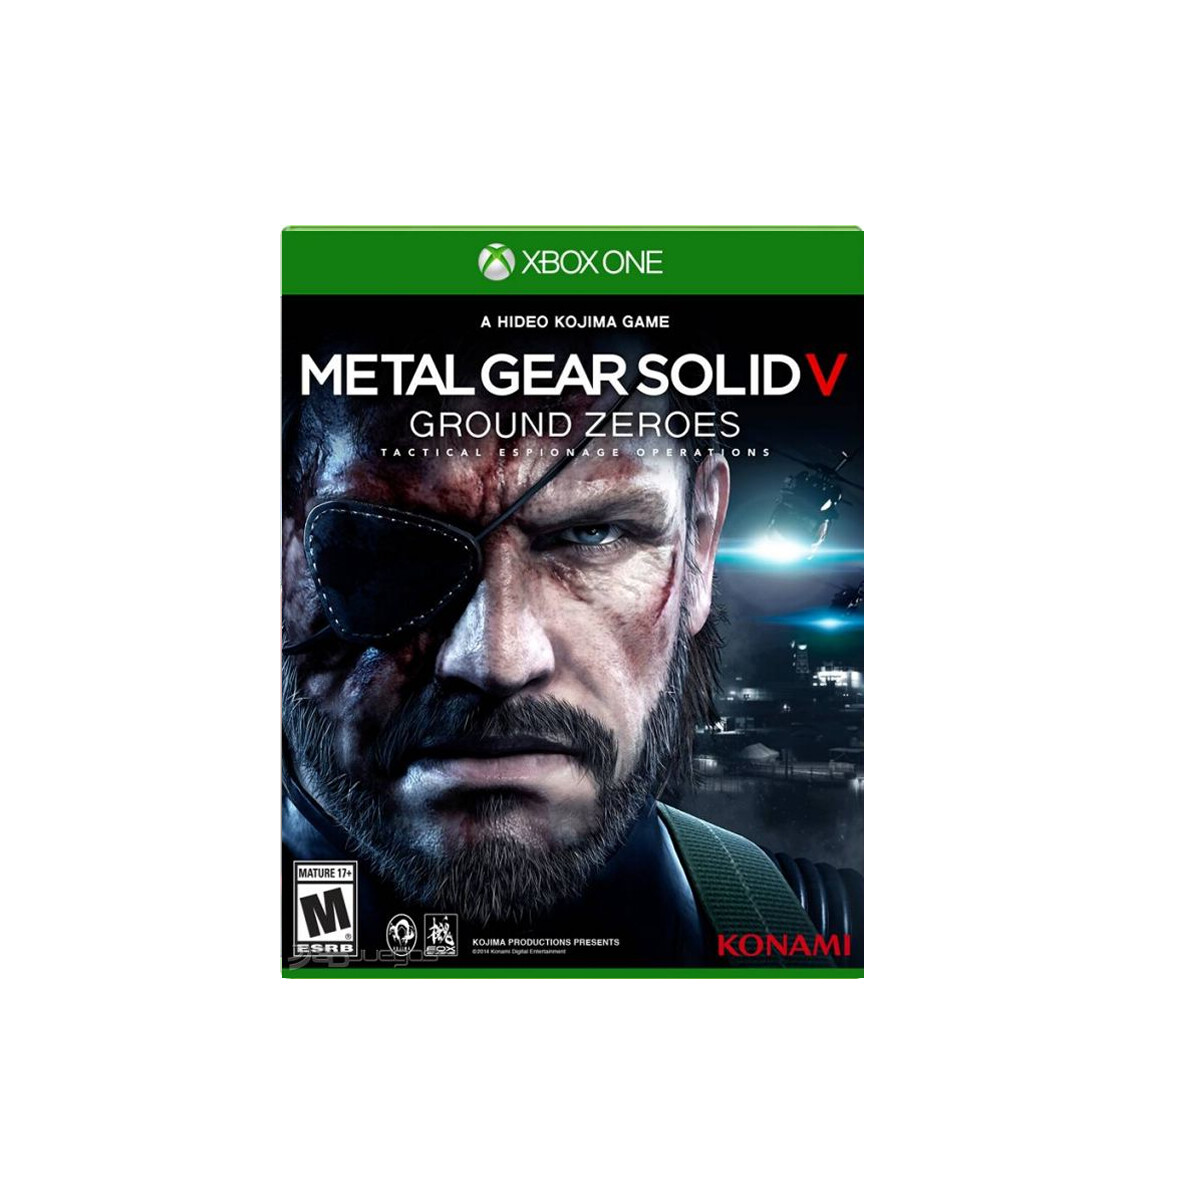 XBOX ONE METAL GEAR SOLID V: GROUND ZEROES 